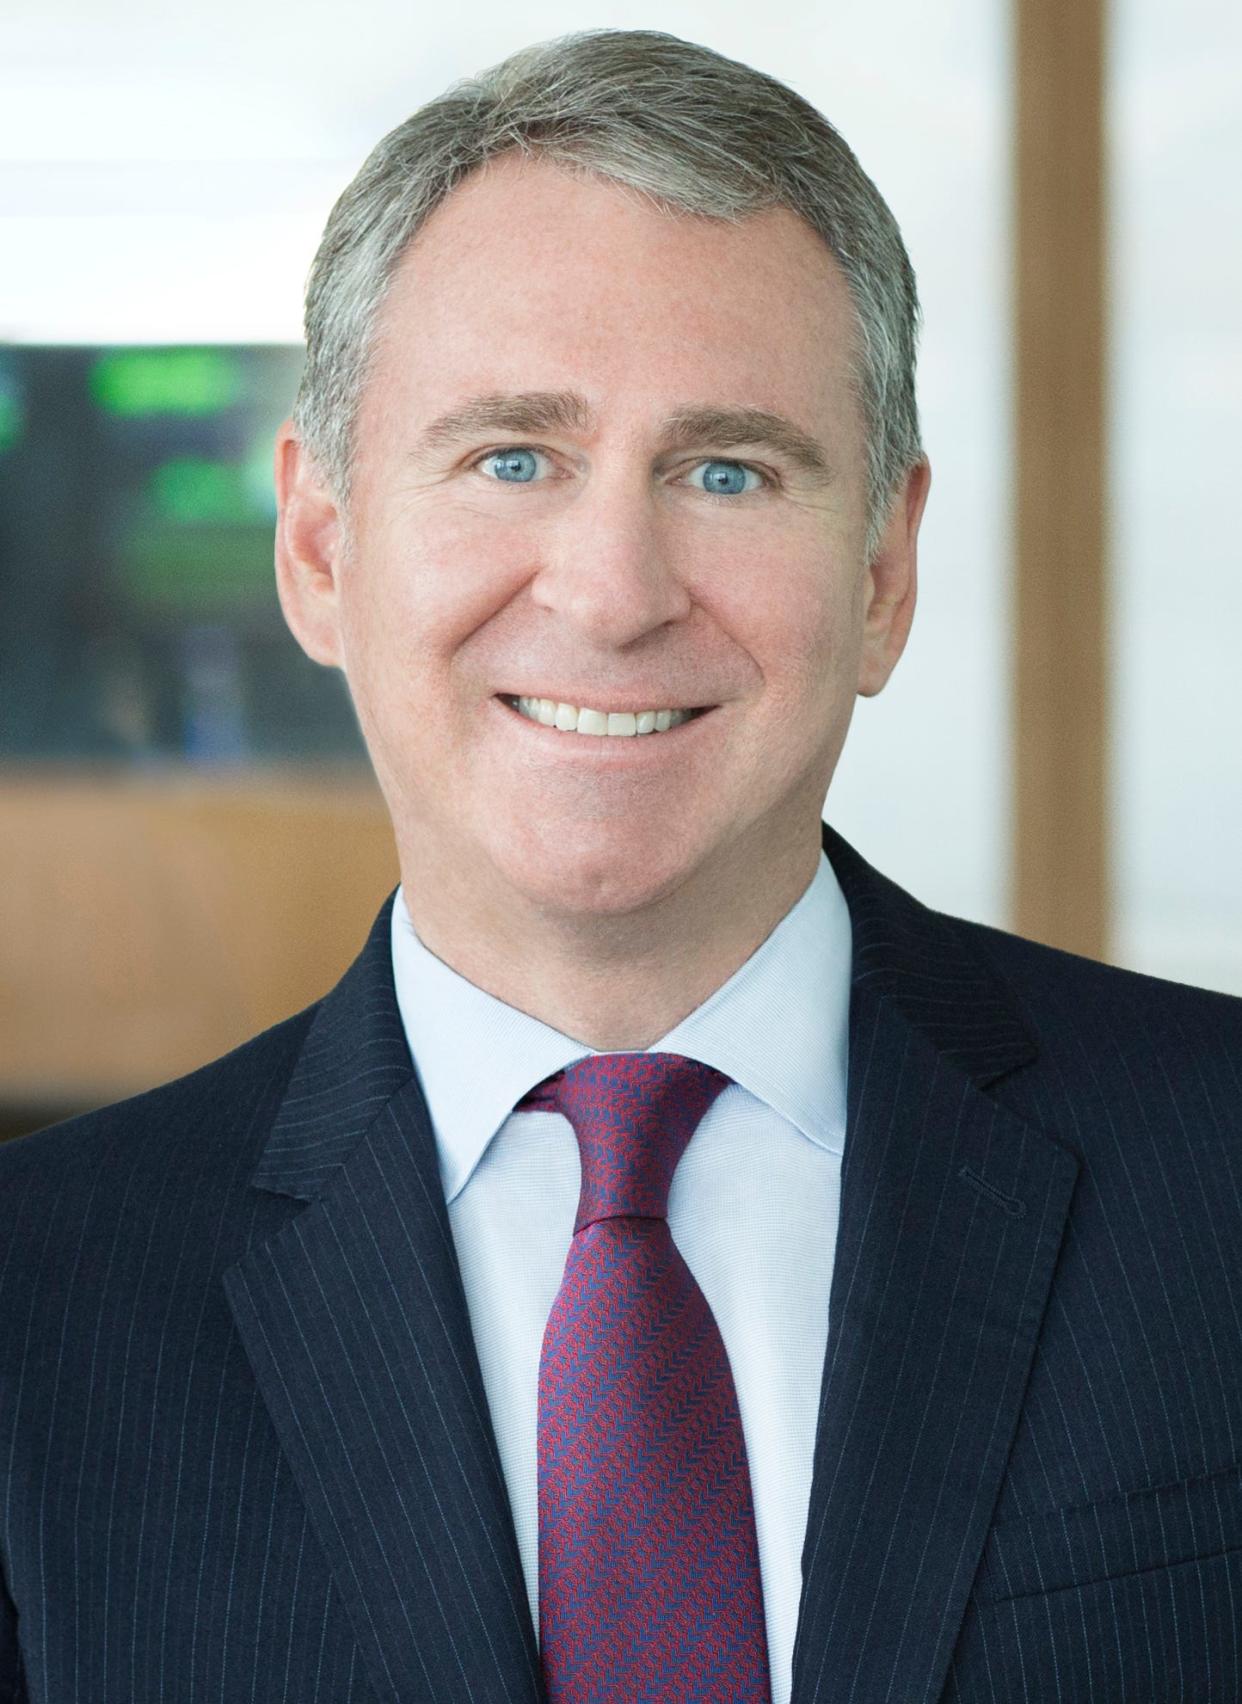 Hedge-fund manager Kenneth C. Griffin